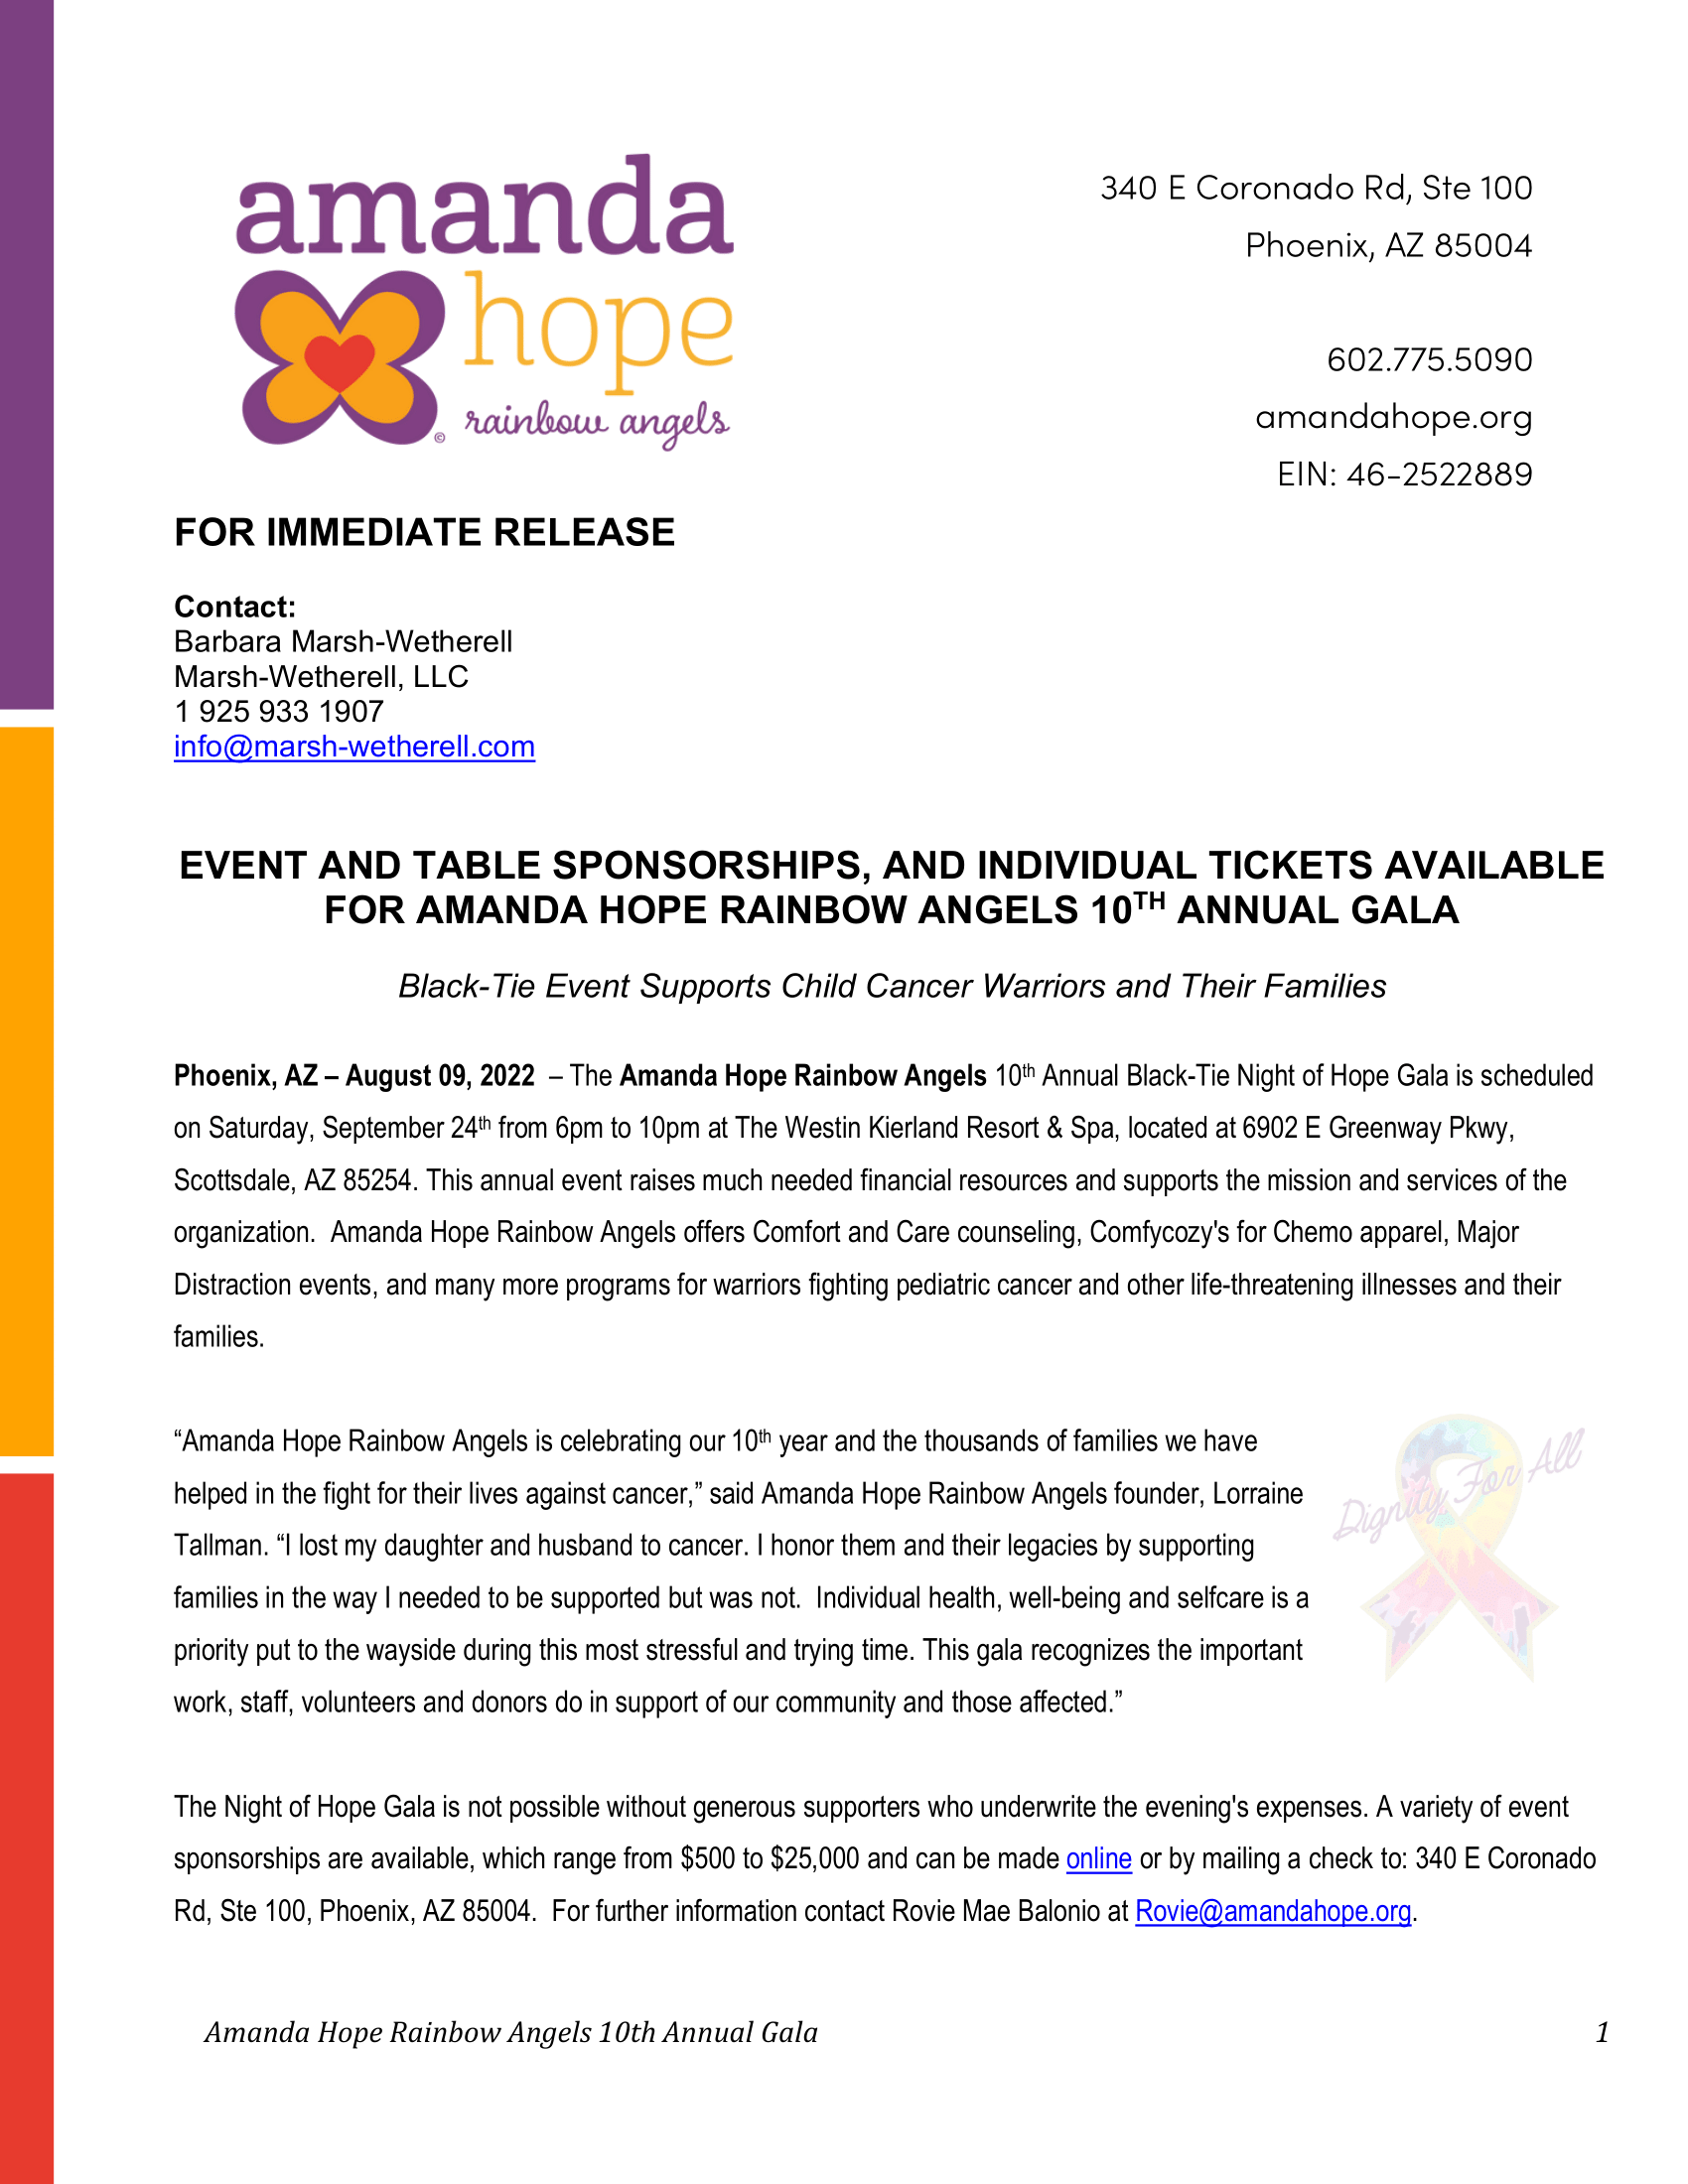 Event and Table Sponsorship, and Individual Tickets Available for Amanda Hope Rainbow Angels 10th Annual Gala 